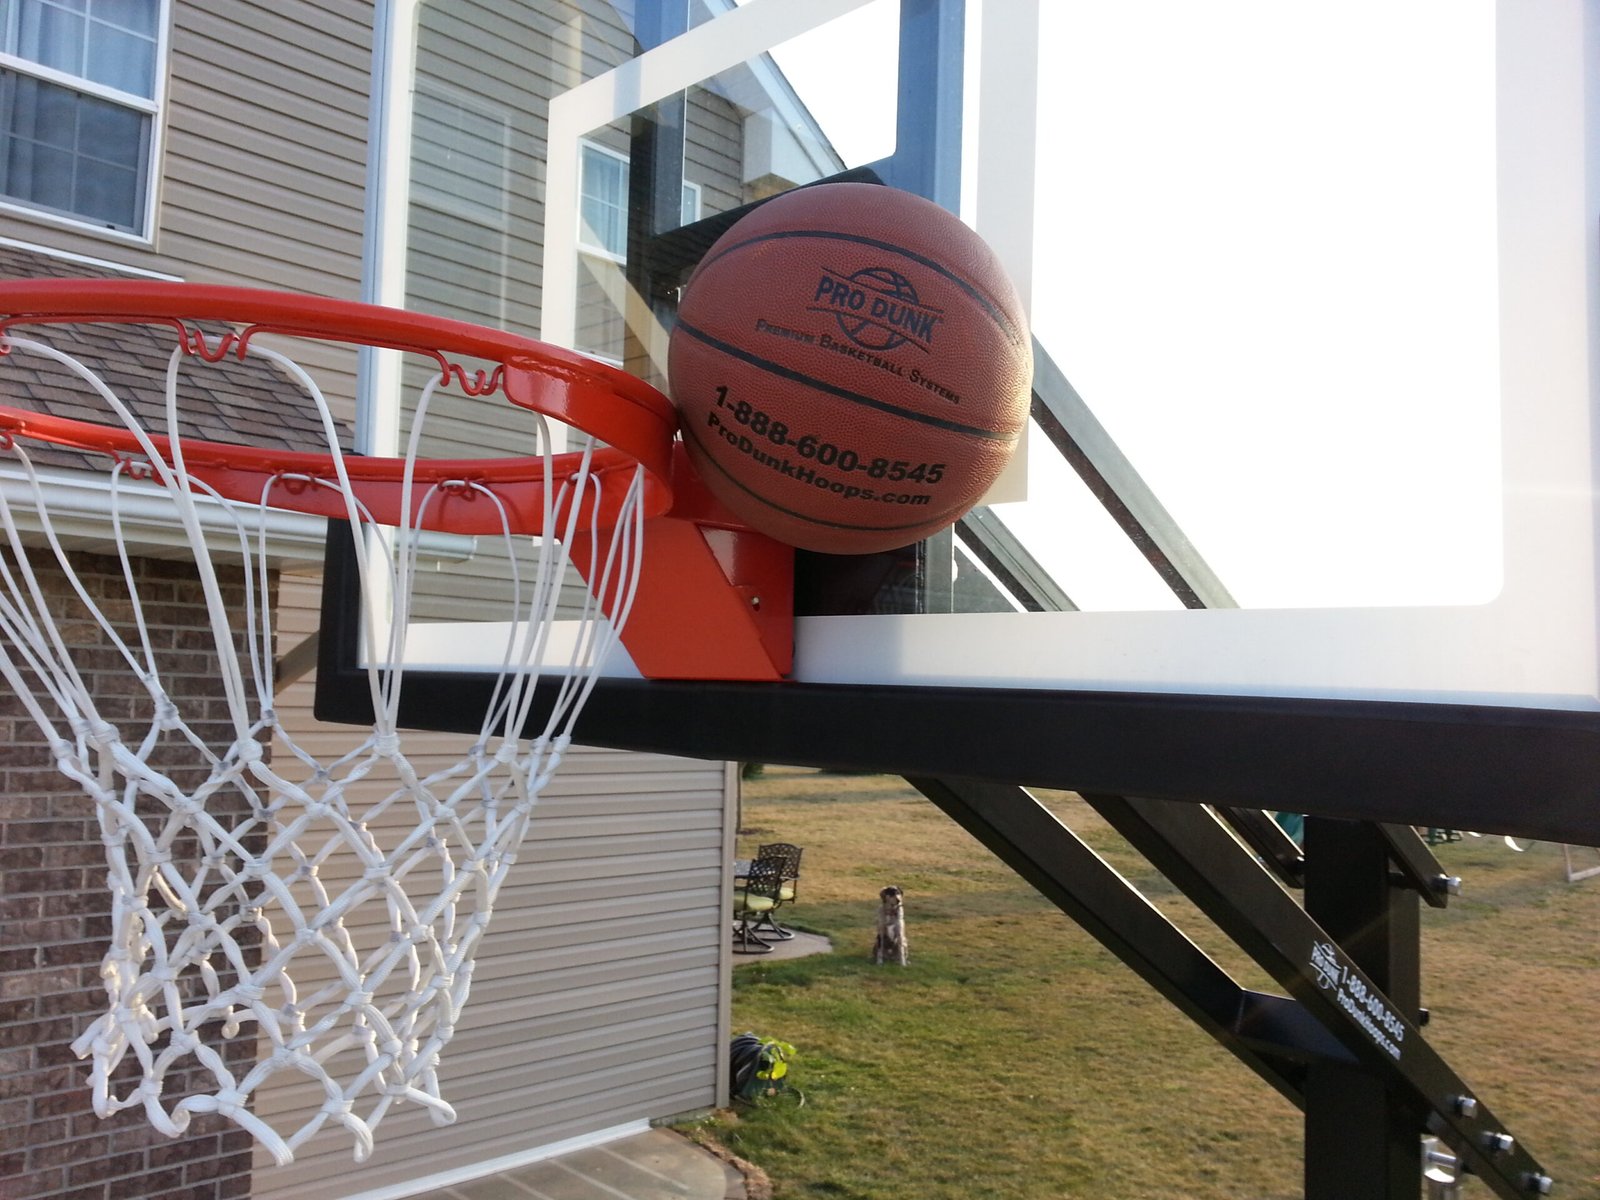 What Should You Look for When Choosing a Basketball System?